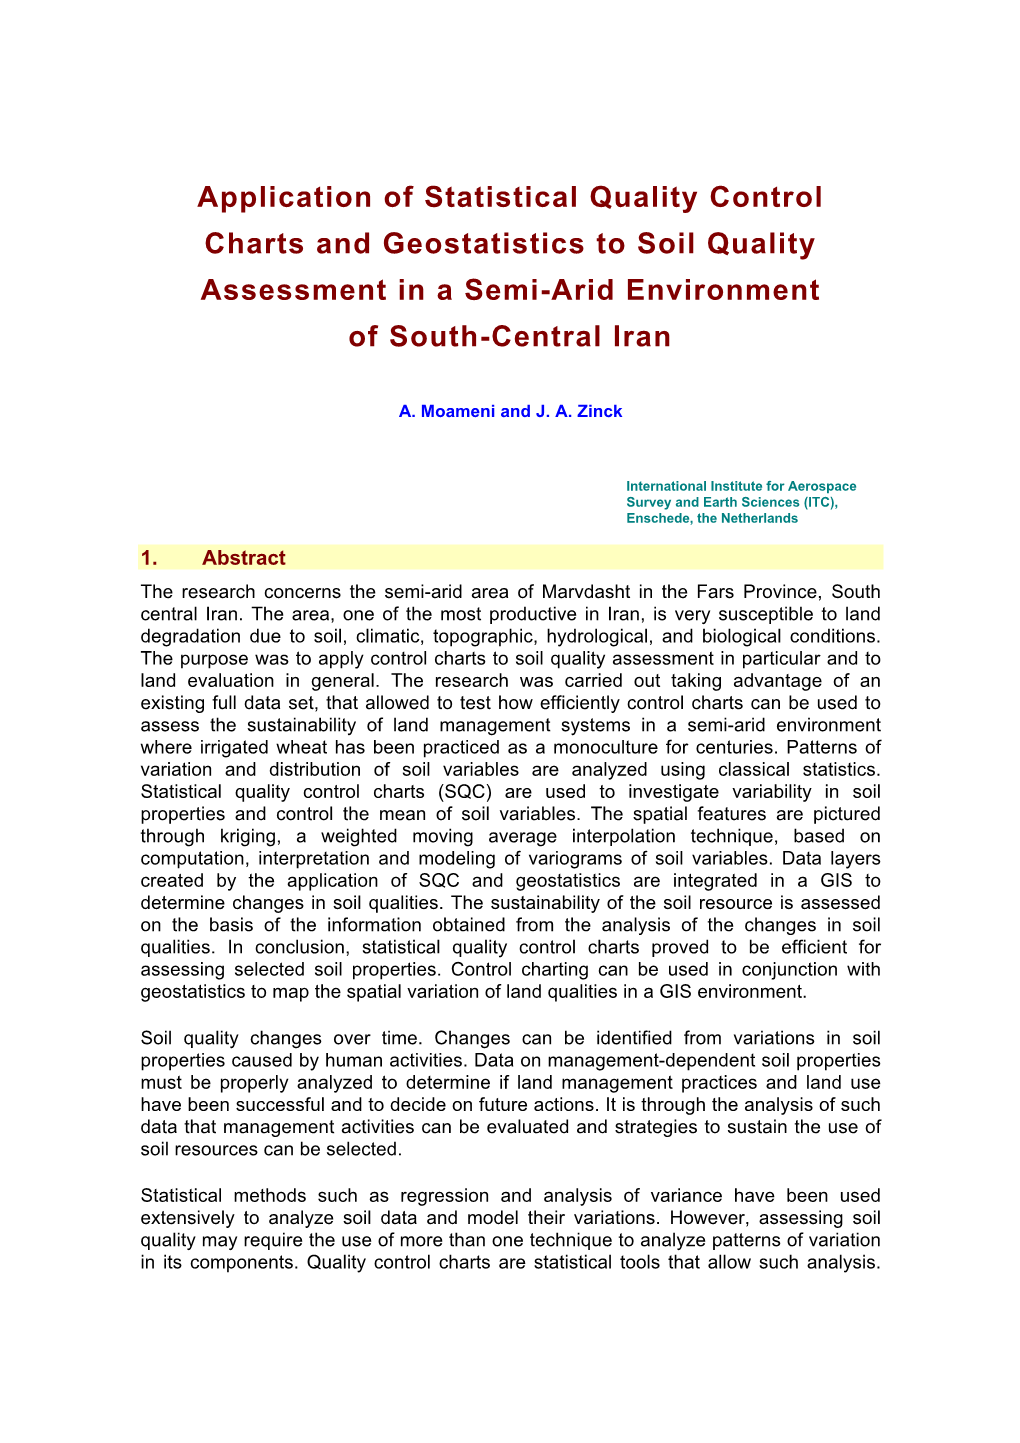 Application of Statistical Quality Control Charts and Geostatistics to Soil Quality Assessment in a Semi-Arid Environment of South-Central Iran